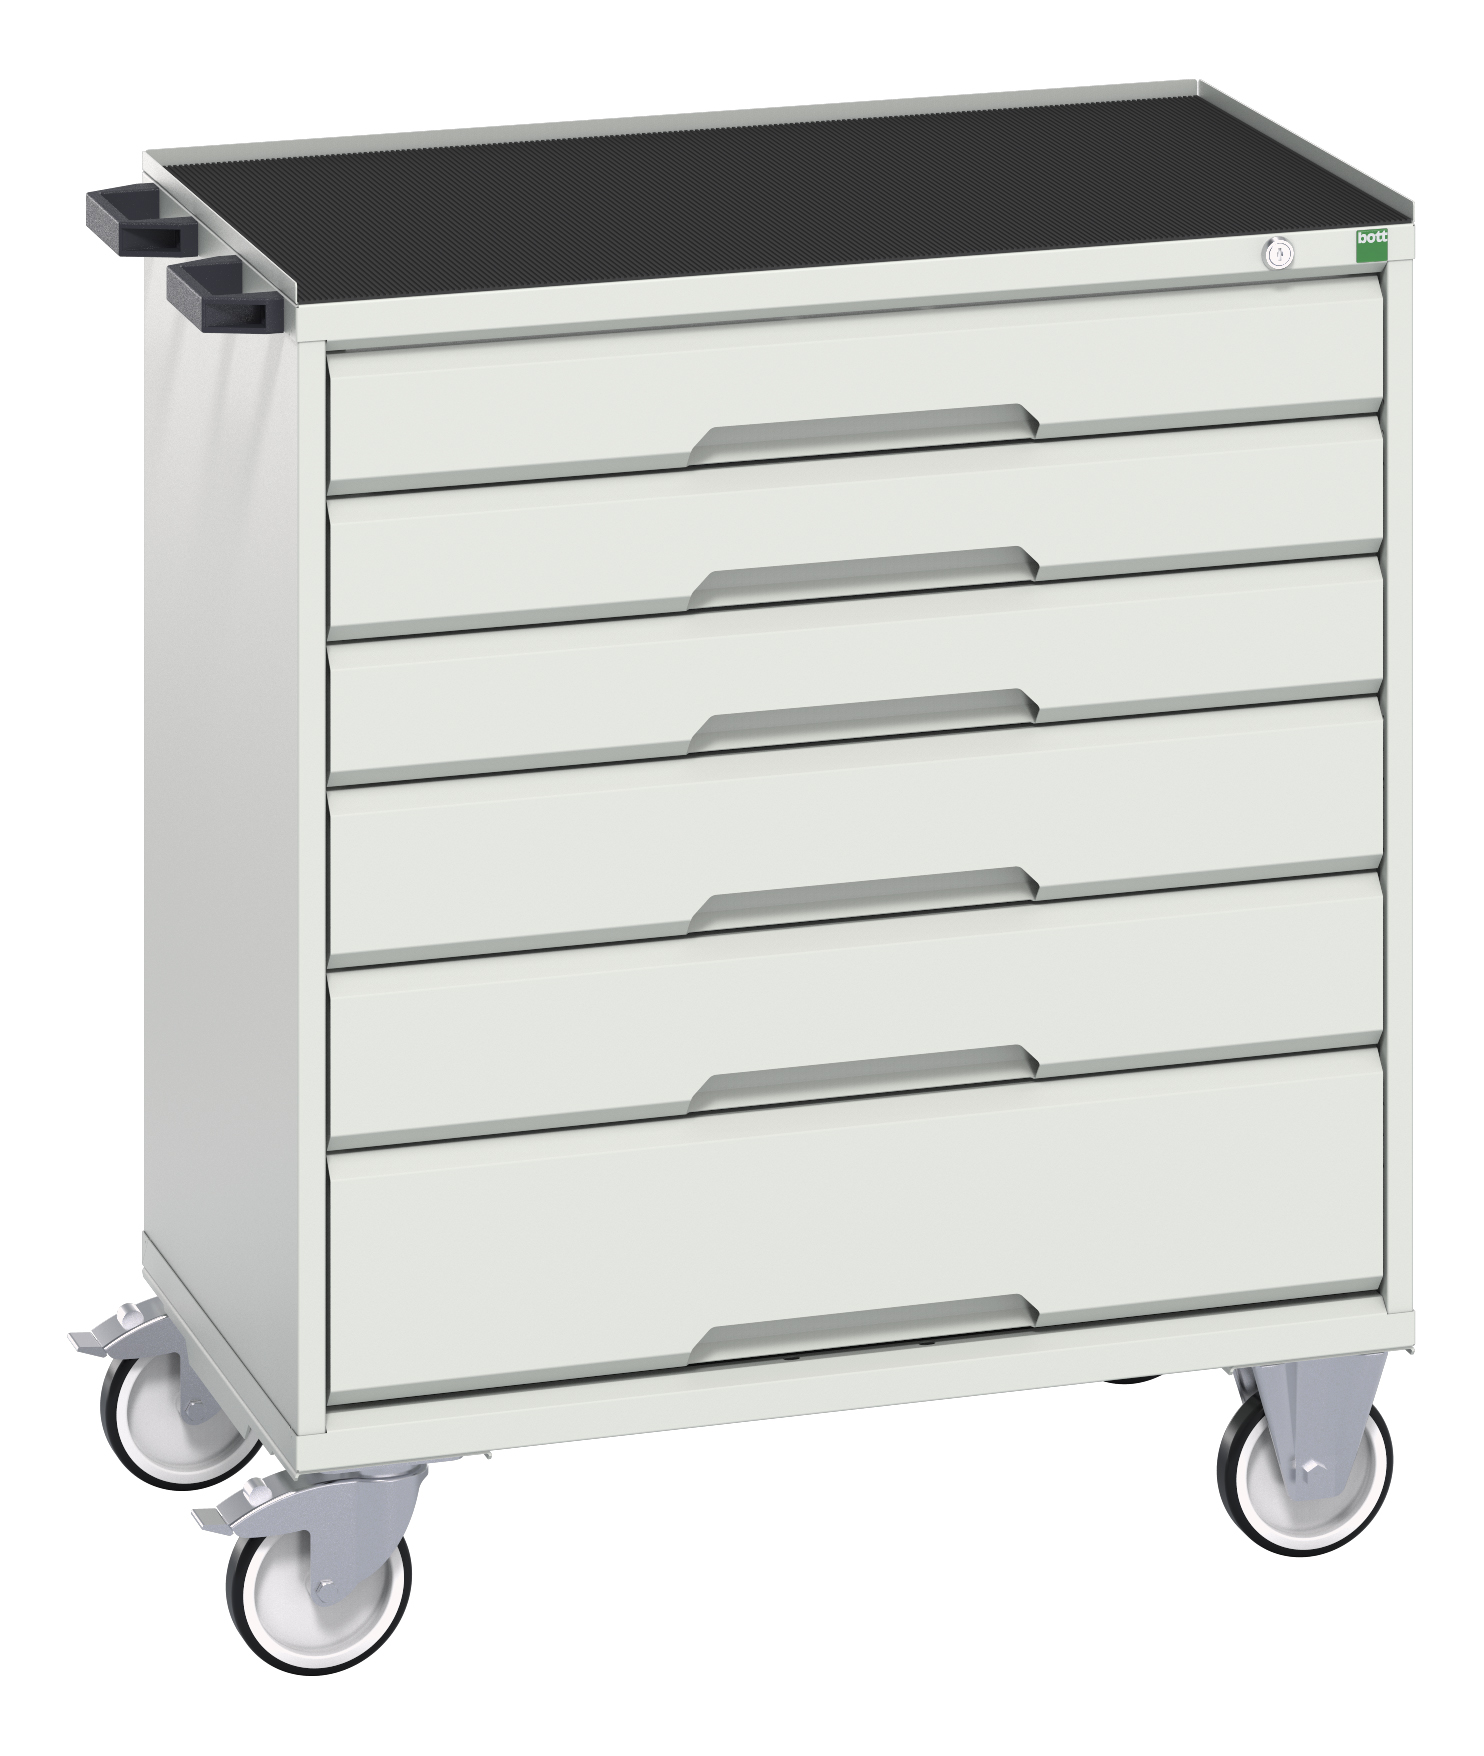 Bott Verso Mobile Drawer Cabinet With 6 Drawers & Top Tray With Mat - 16927005.16